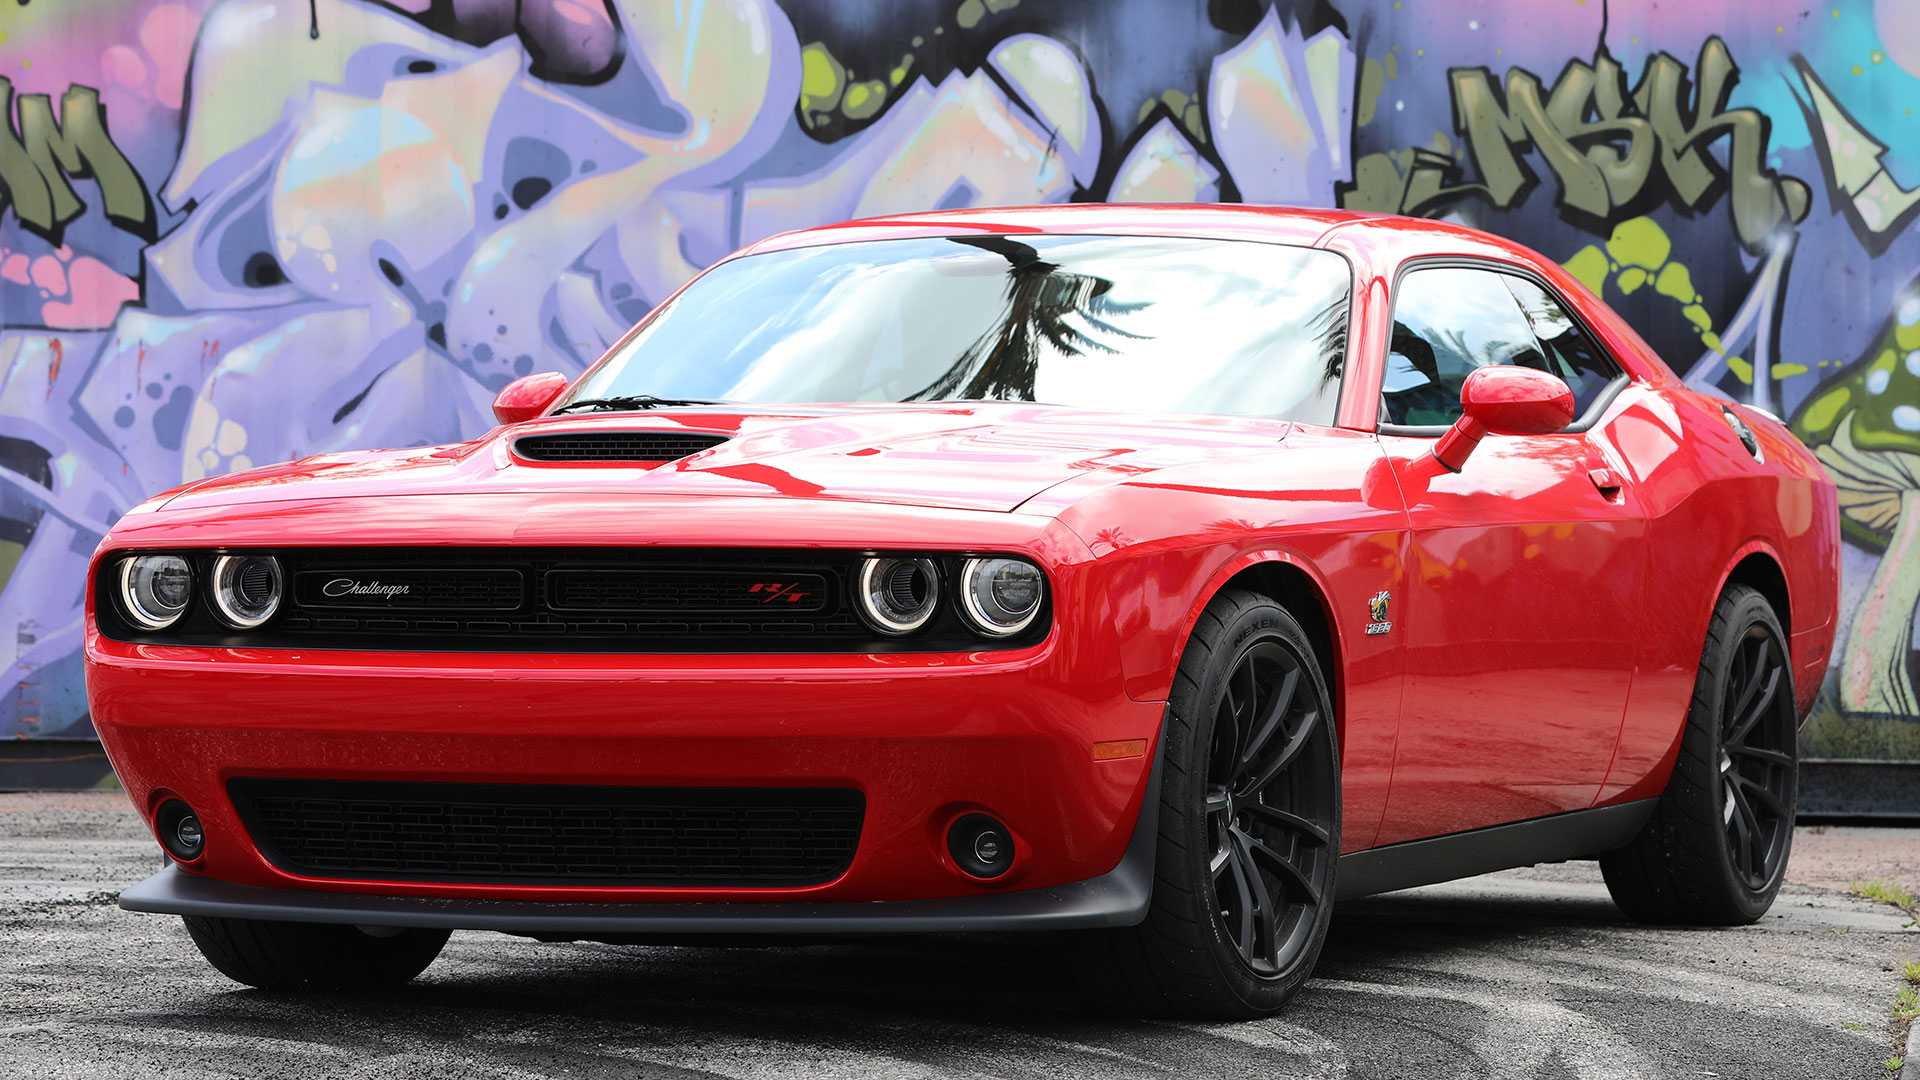 Dodge Challenger R_T front angular view